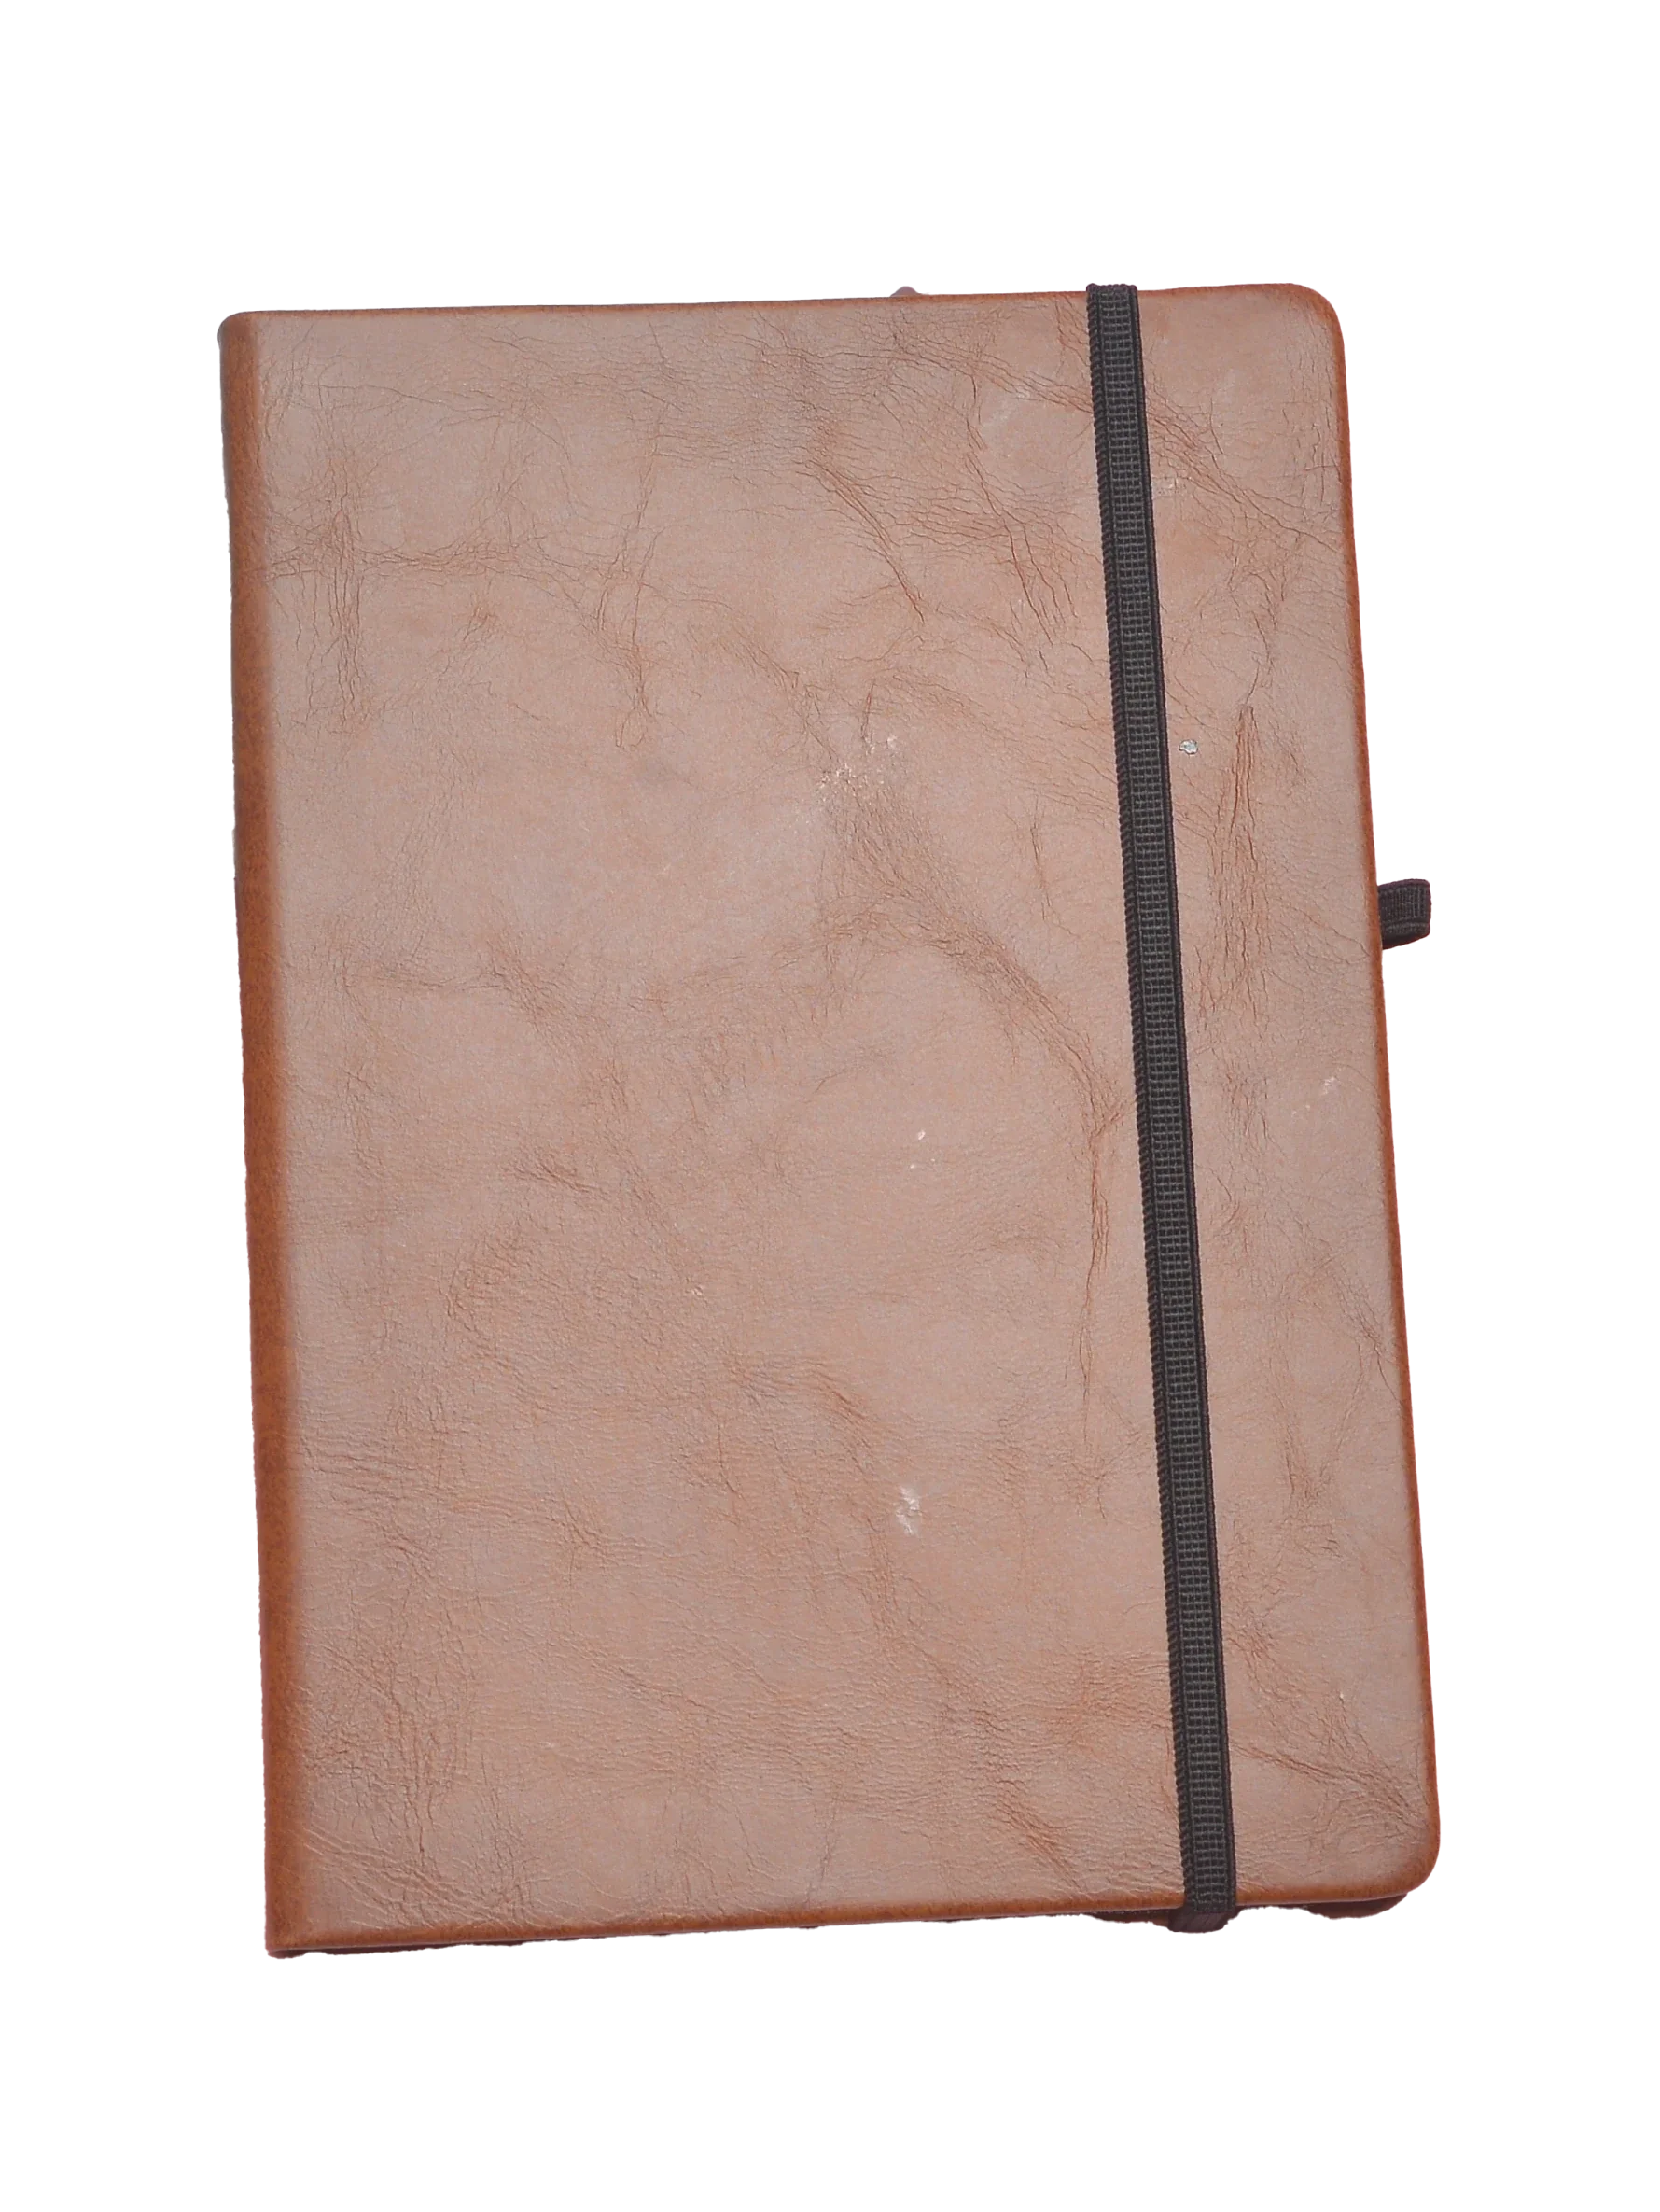 back view of diary